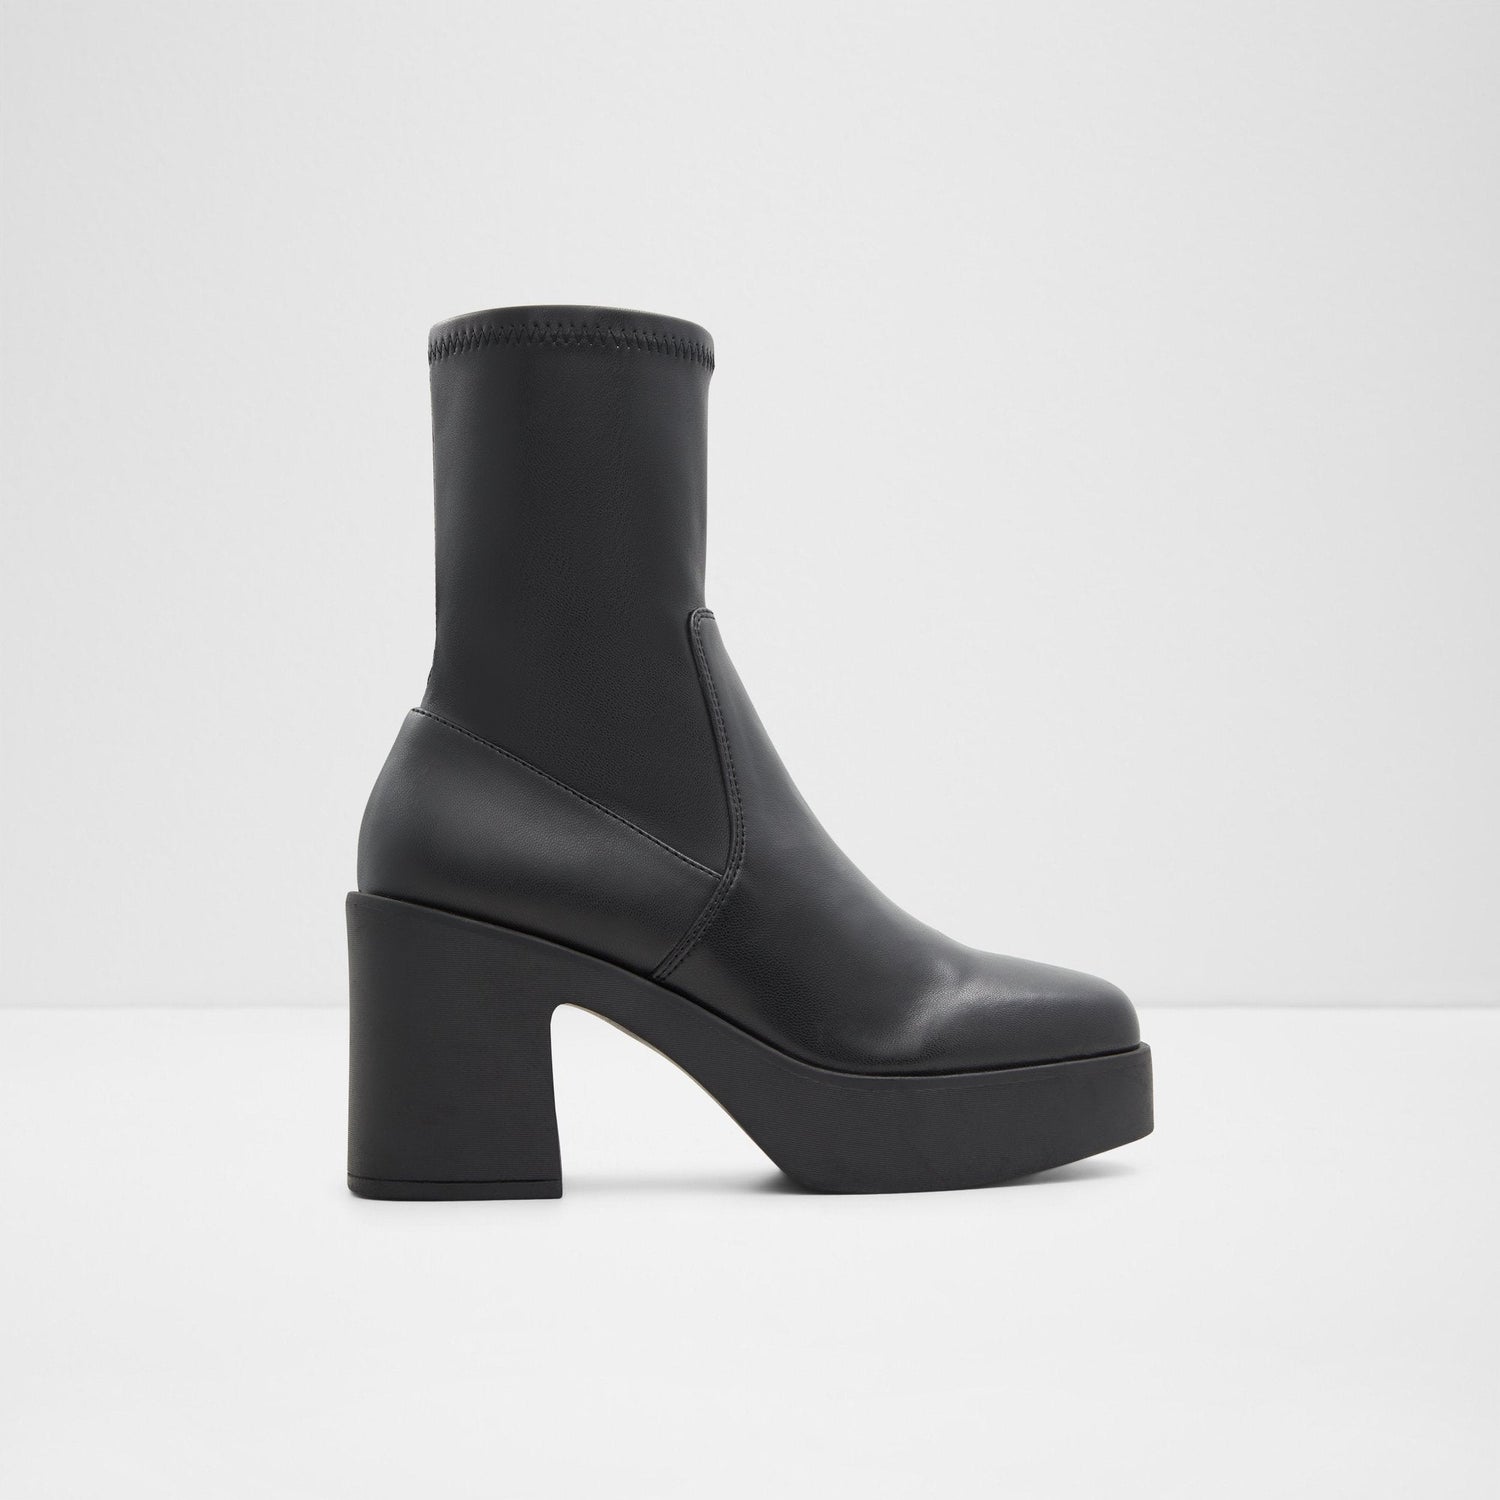 Upstep Ankle Boots